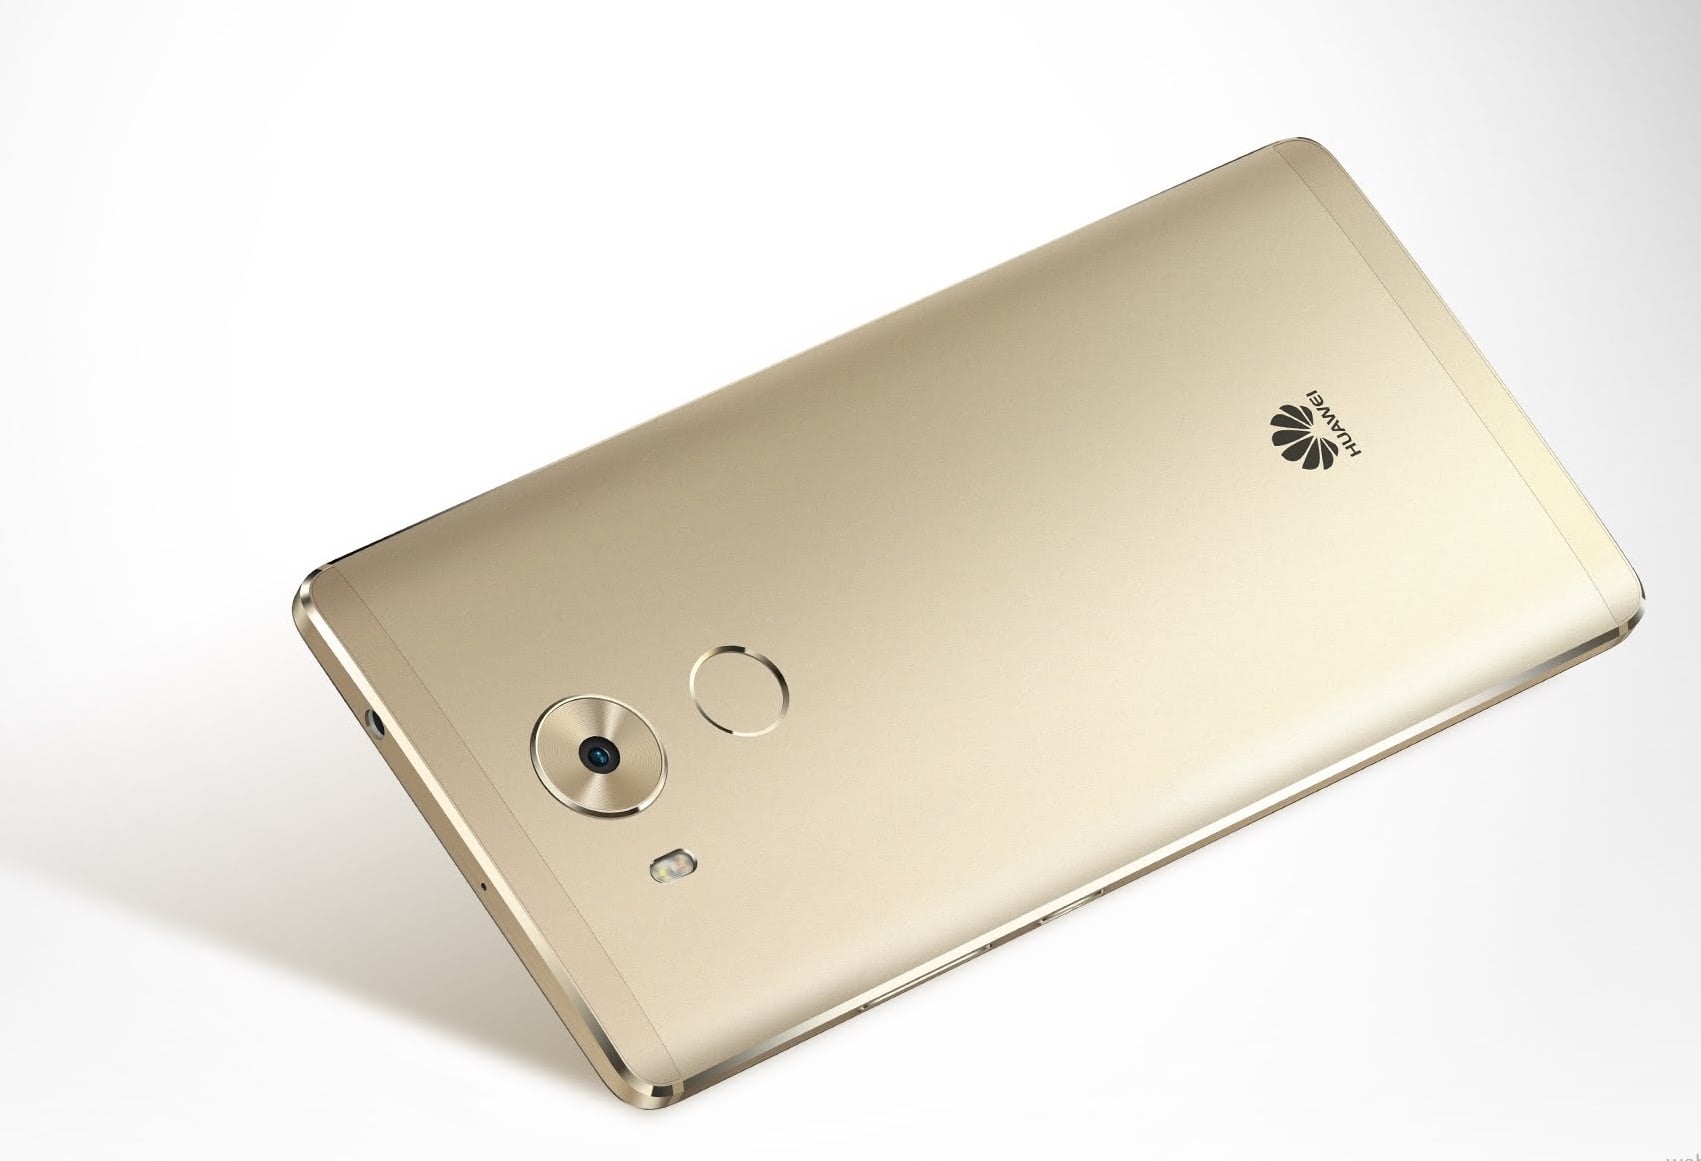 Will Huawei beat Apple and Samsung with Its all new Huawei Mate 8